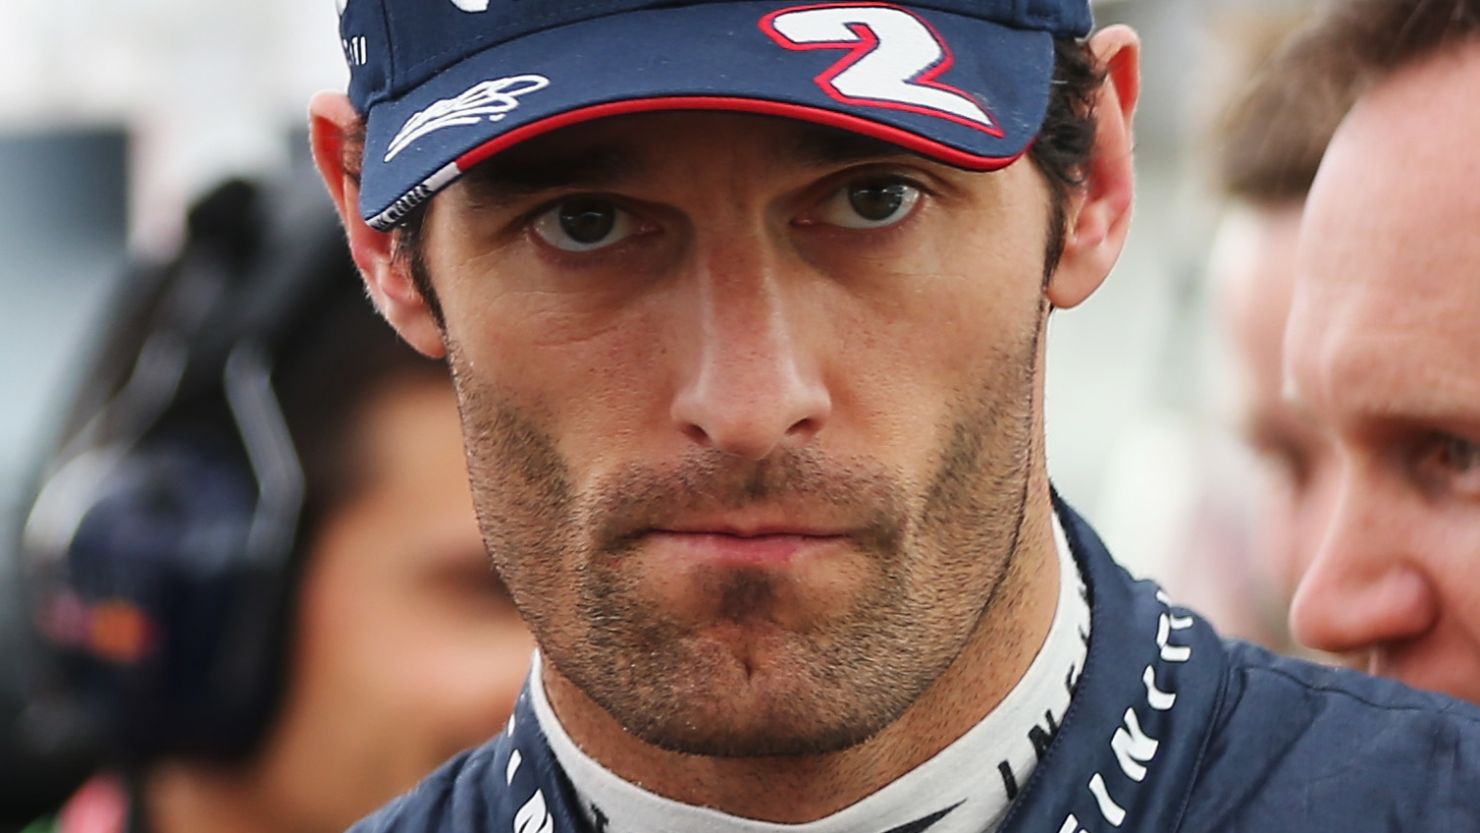 Mark Webber will leave Red Bull and Formula One at the end of the season.